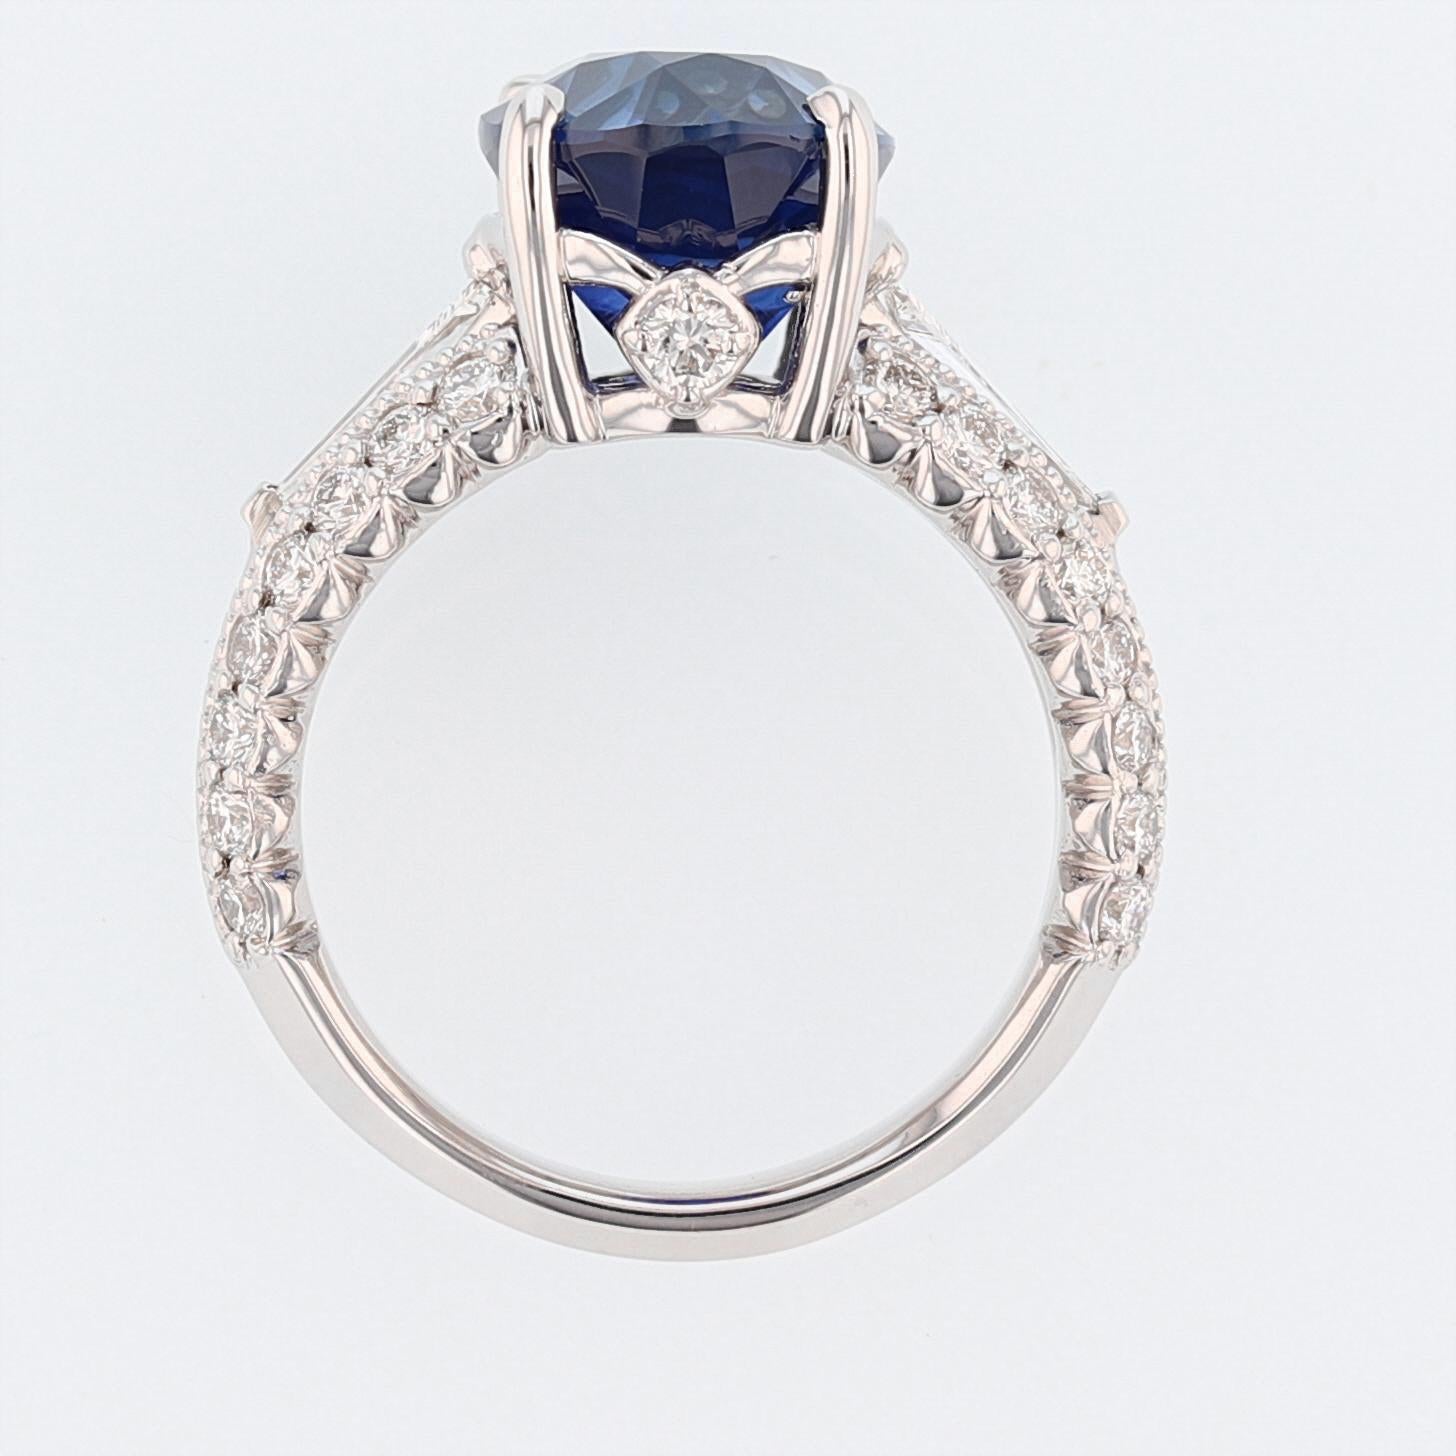 Nazarelle 18 Karat Gold 7.28 Carat Certified Blue Sapphire and Diamond Ring In New Condition For Sale In Houston, TX